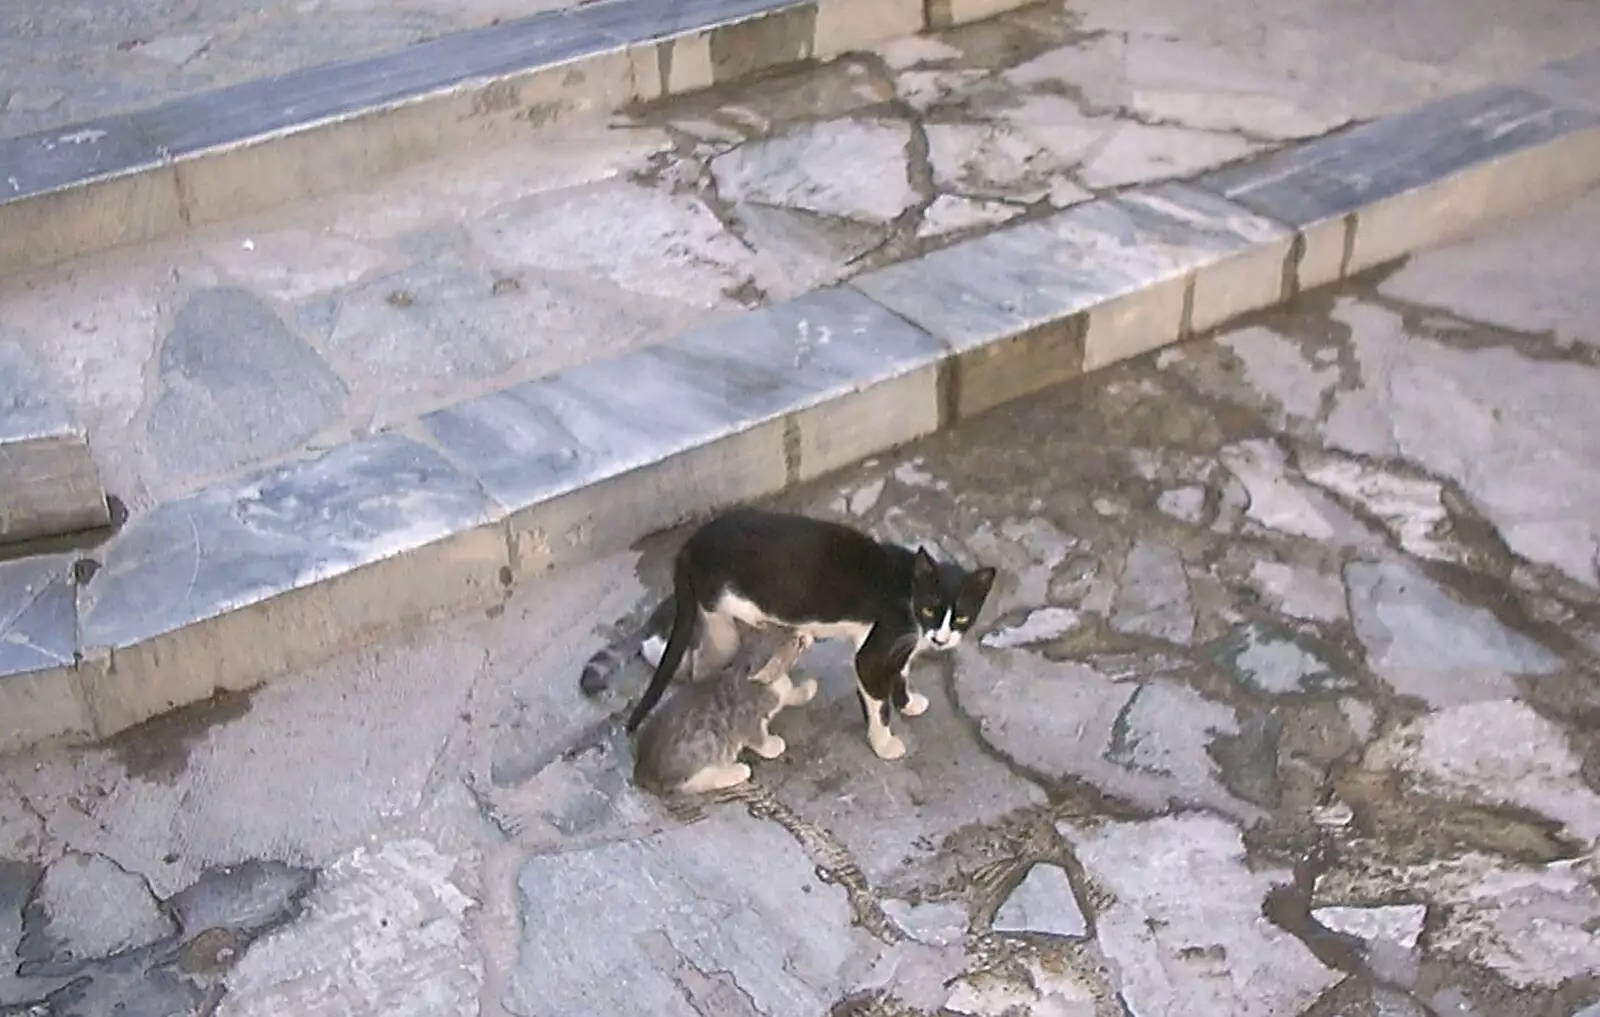 A feral cat feeds its kitten, from A Postcard From Athens: A Day Trip to the Olympics, Greece - 19th August 2004